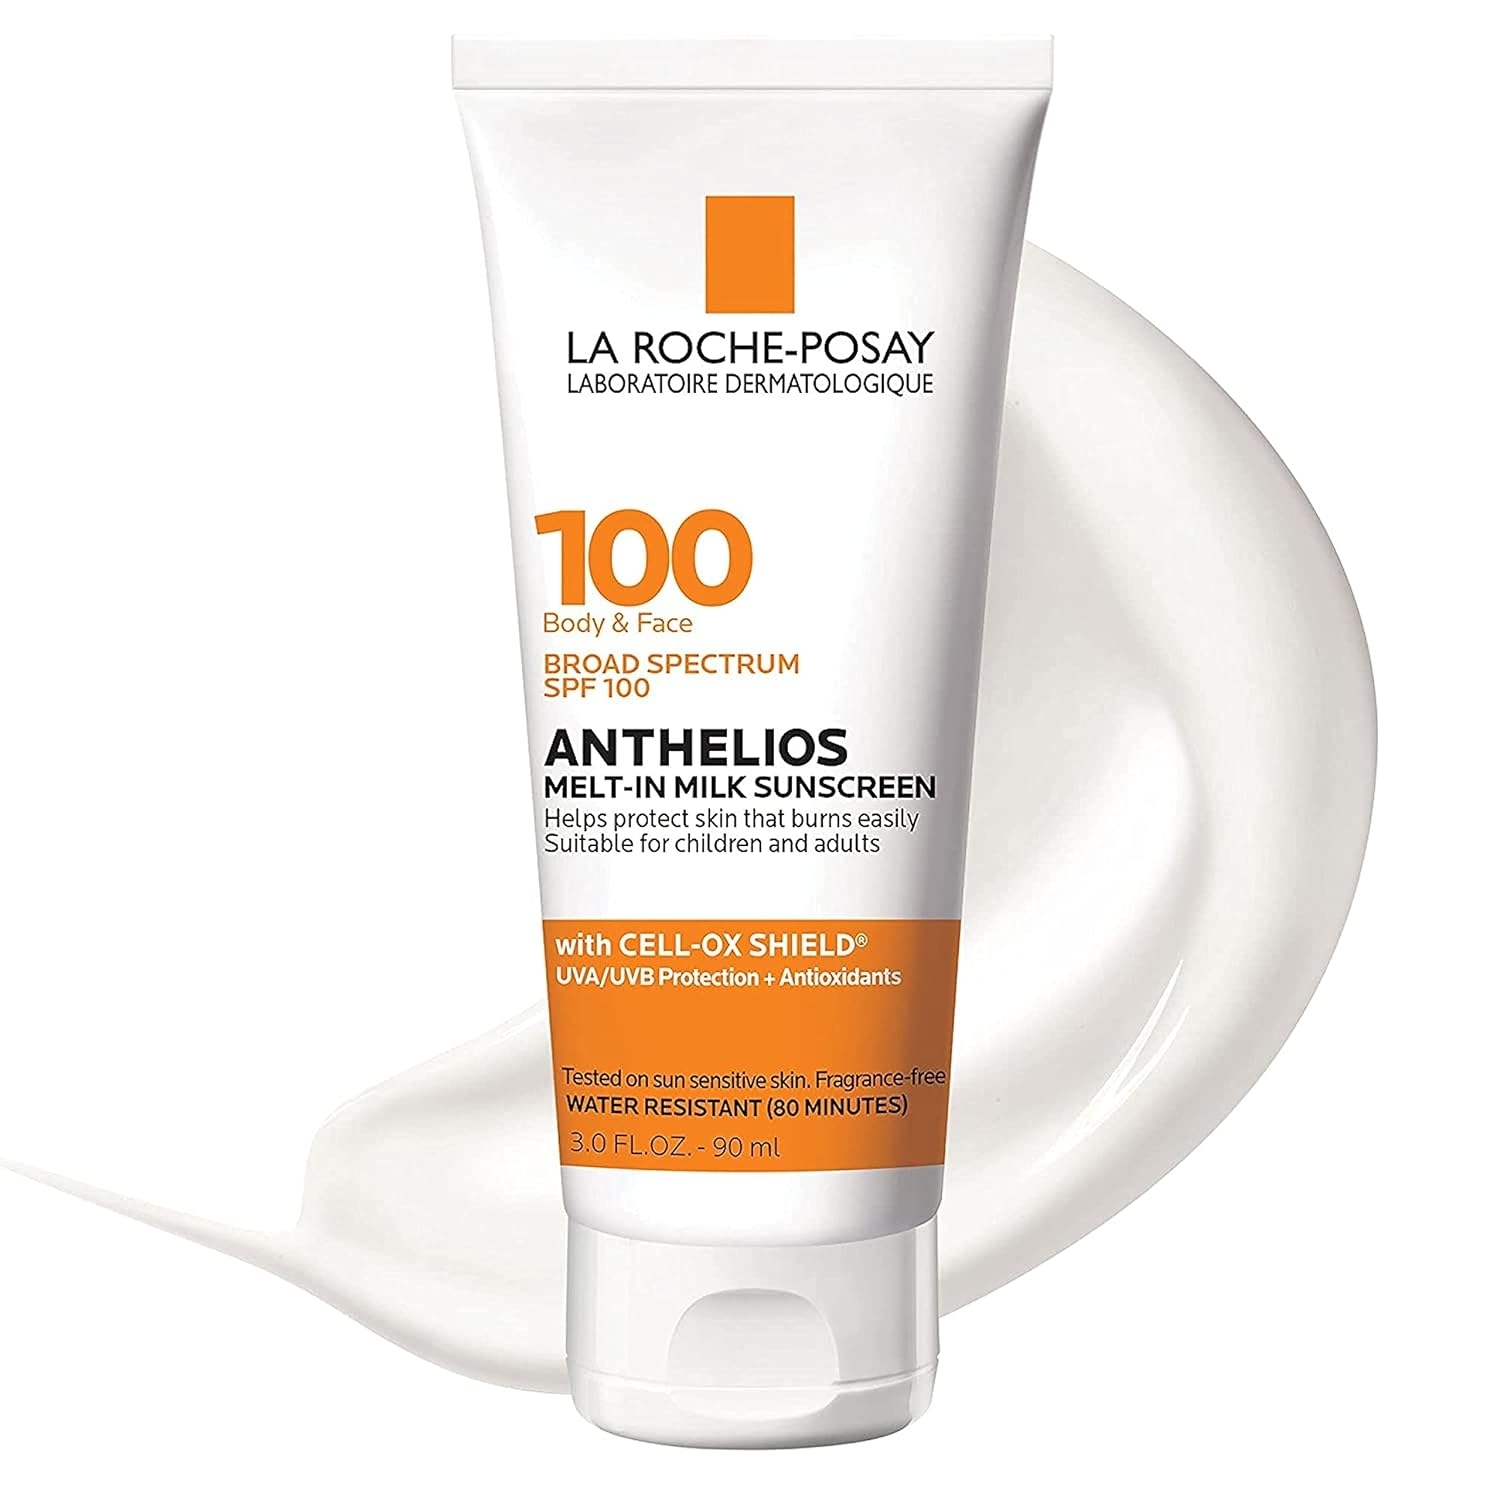 Bottle of La Roche-Posay Anthelios sunscreen beside a dollop of cream